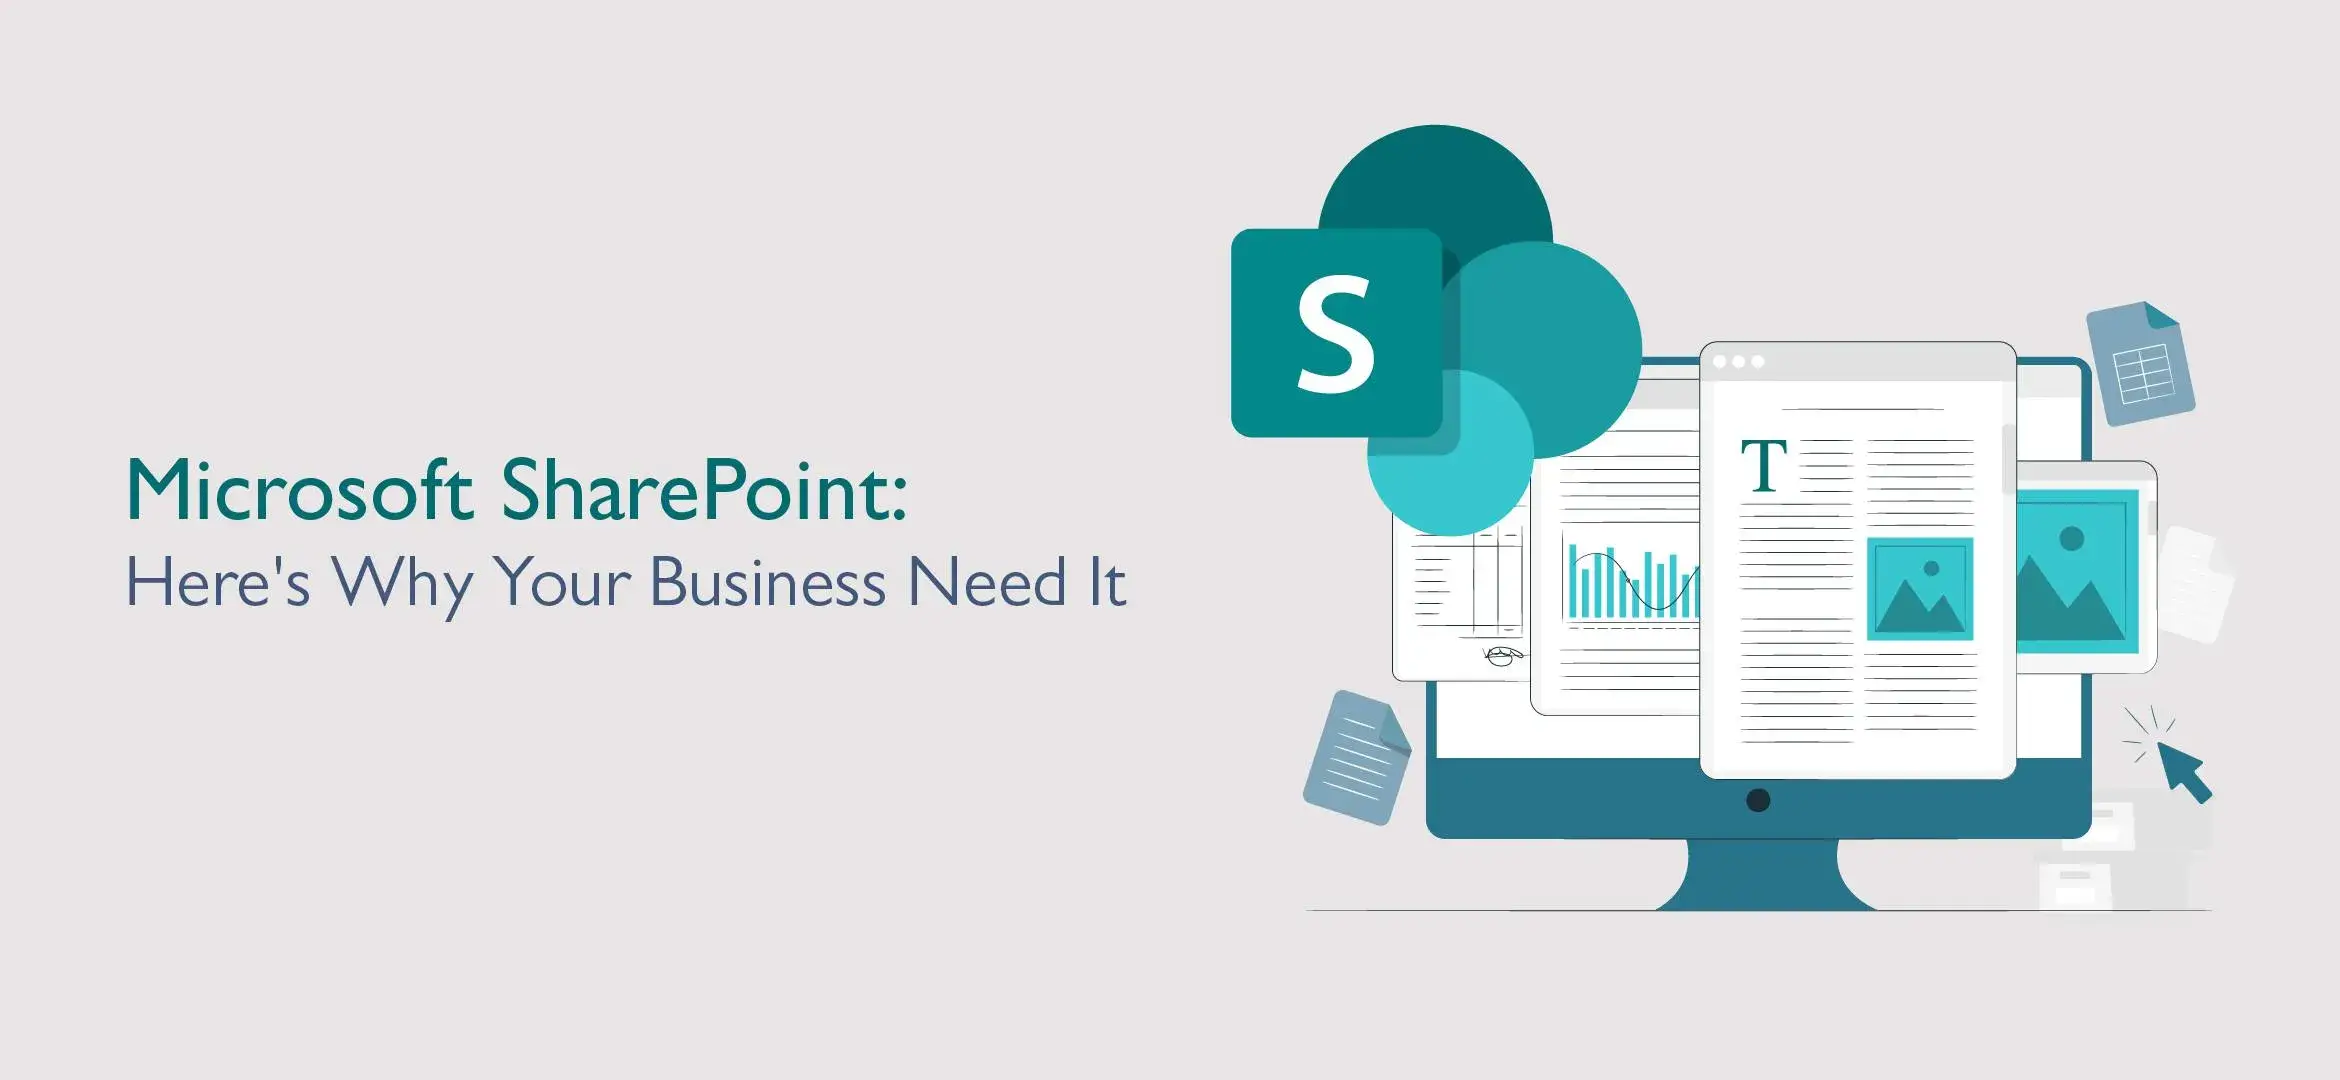 Microsoft SharePoint: Here's Why Your Business Need It